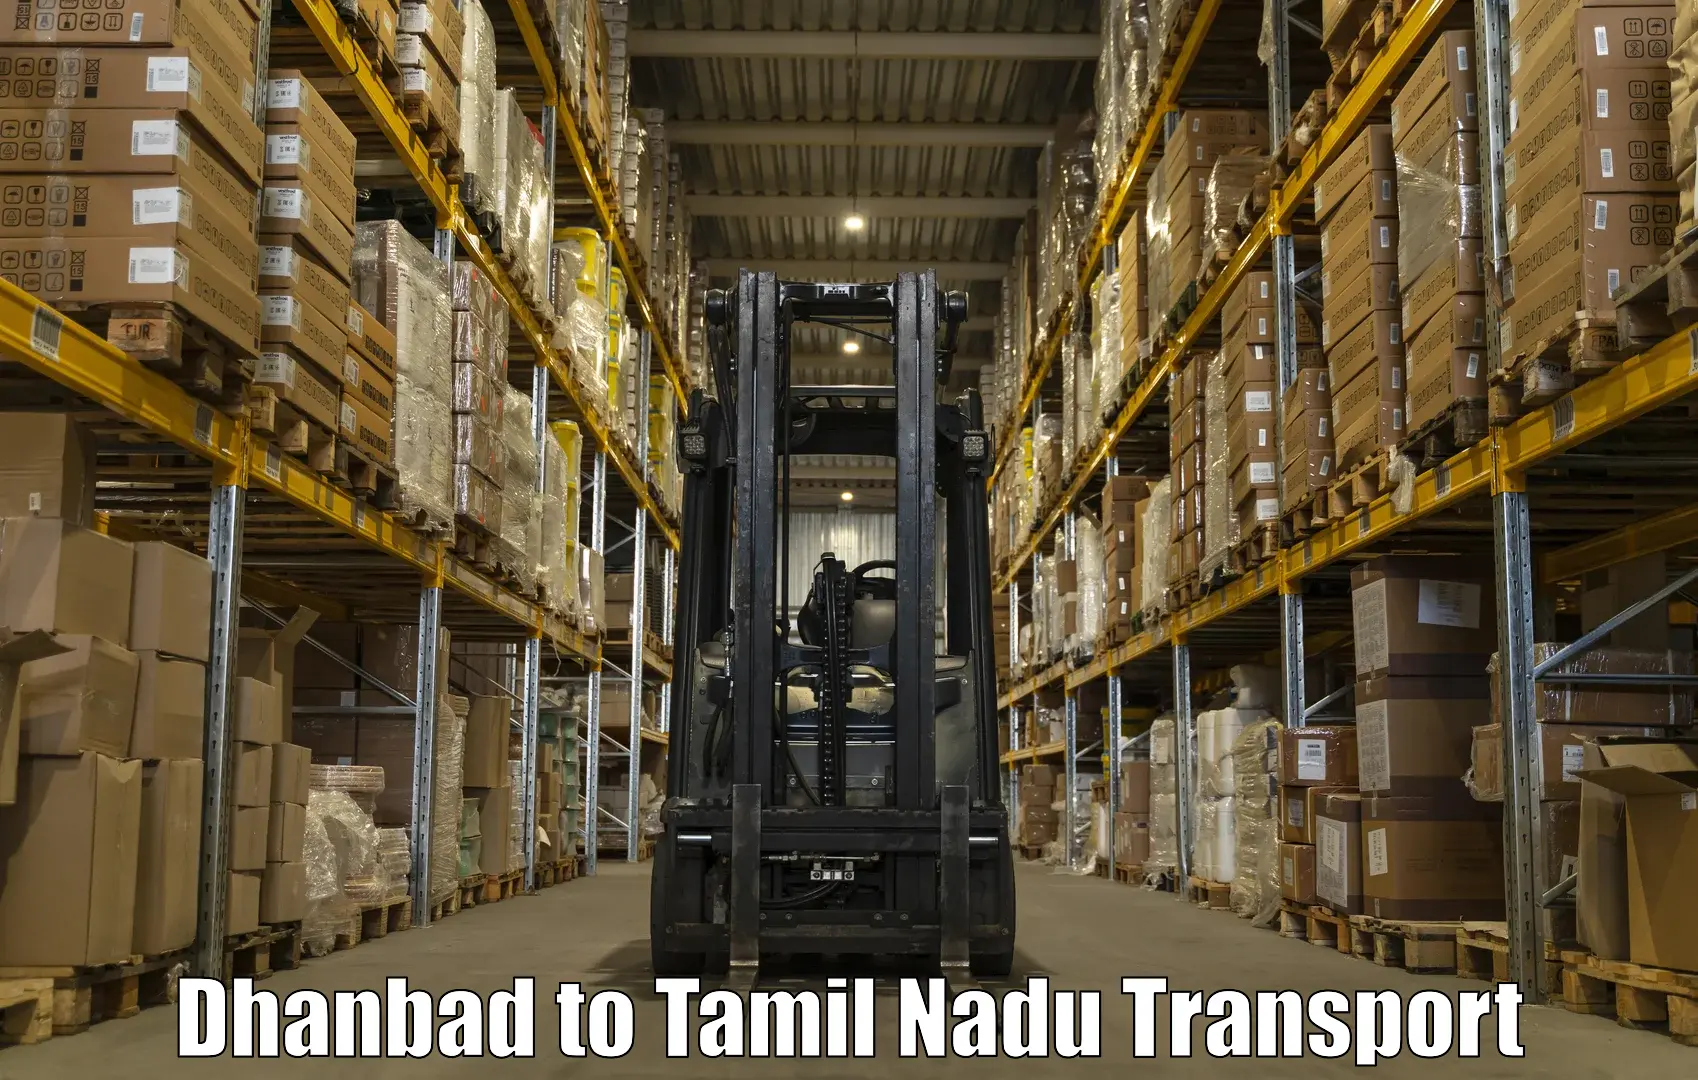 Road transport services Dhanbad to Ranipet